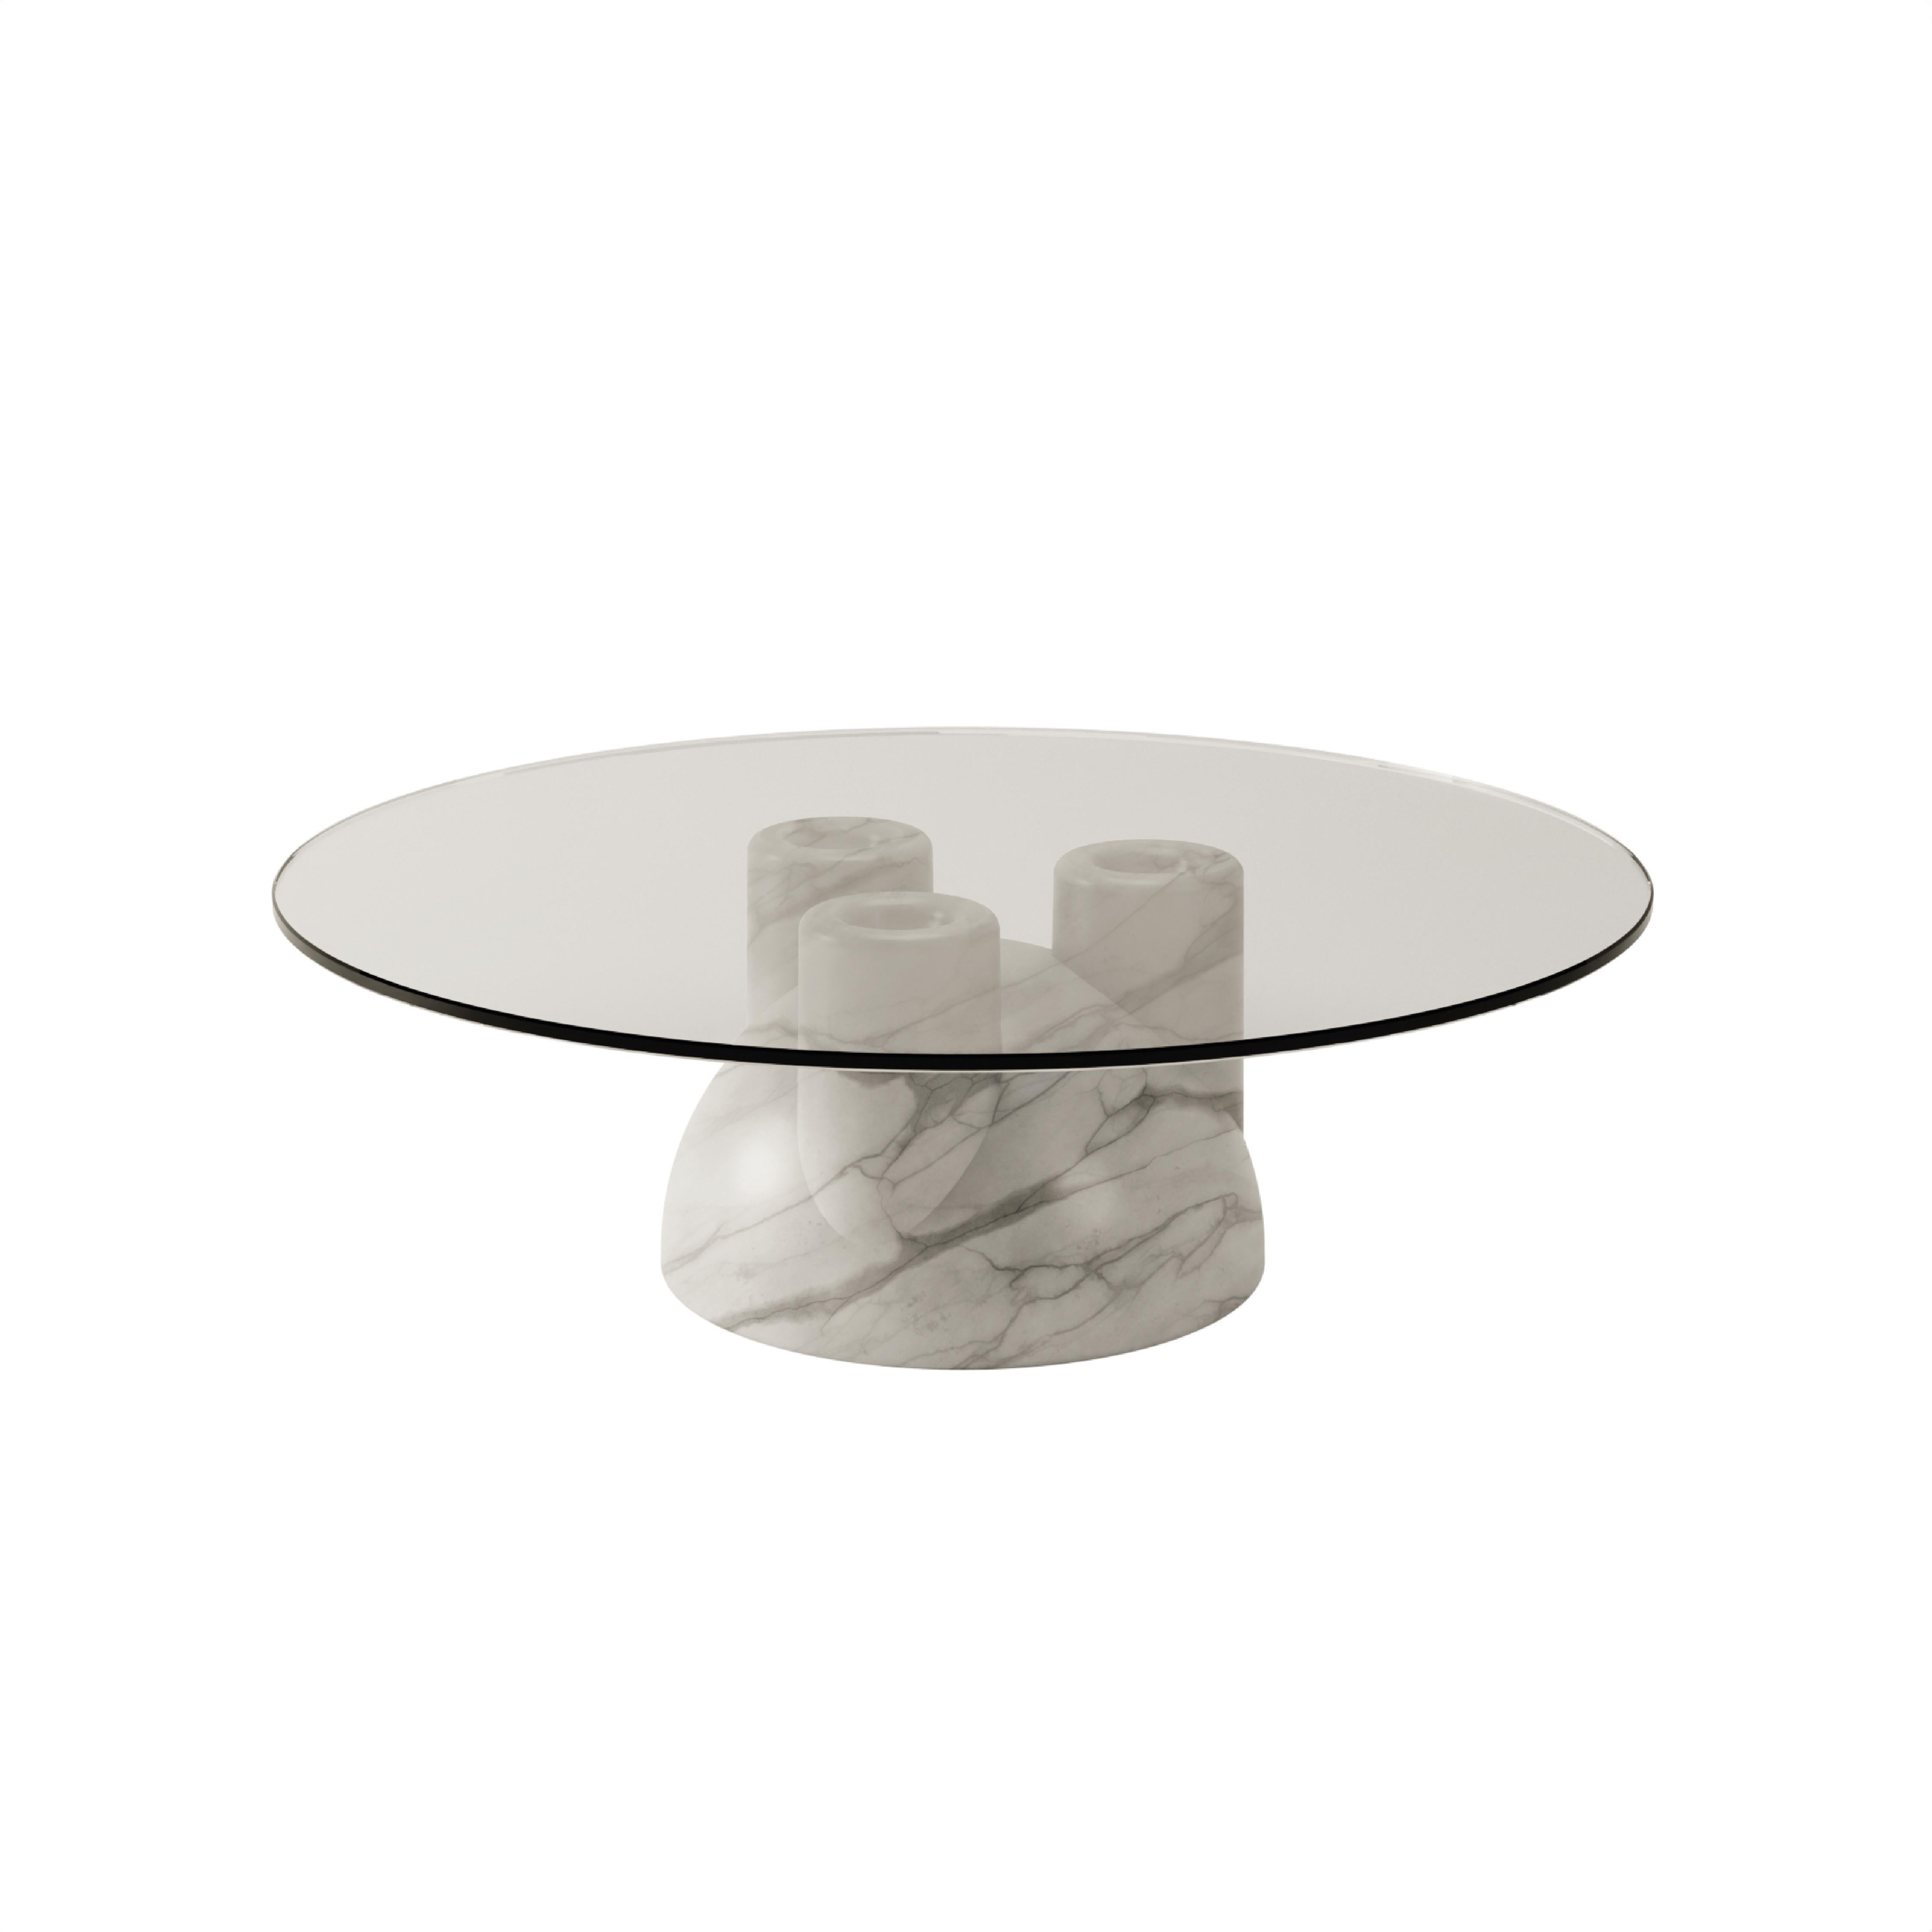 Clean lines, simple geometry and strong materiality are the main features of BURGIO's U line. tAAAble is a reversible coffee table carved from a single piece of marble so the veining flows seamlessly across the unique shape of the table base.